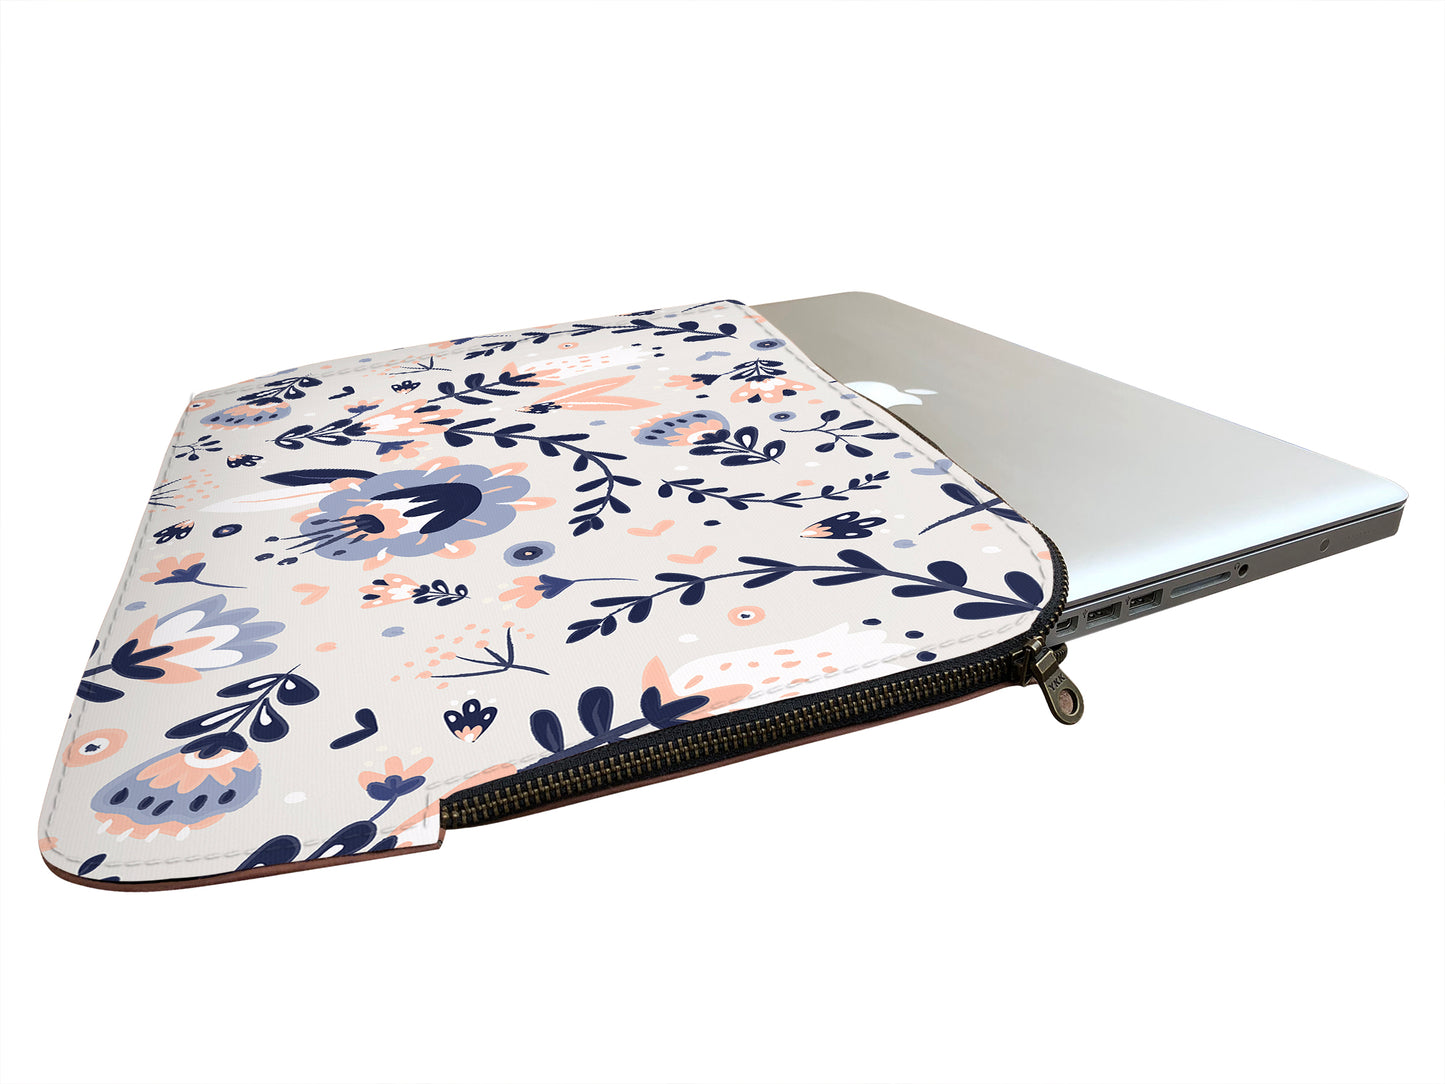 Cute Hand Drawn Leaves And Flowers Pattern Laptop Sleeve